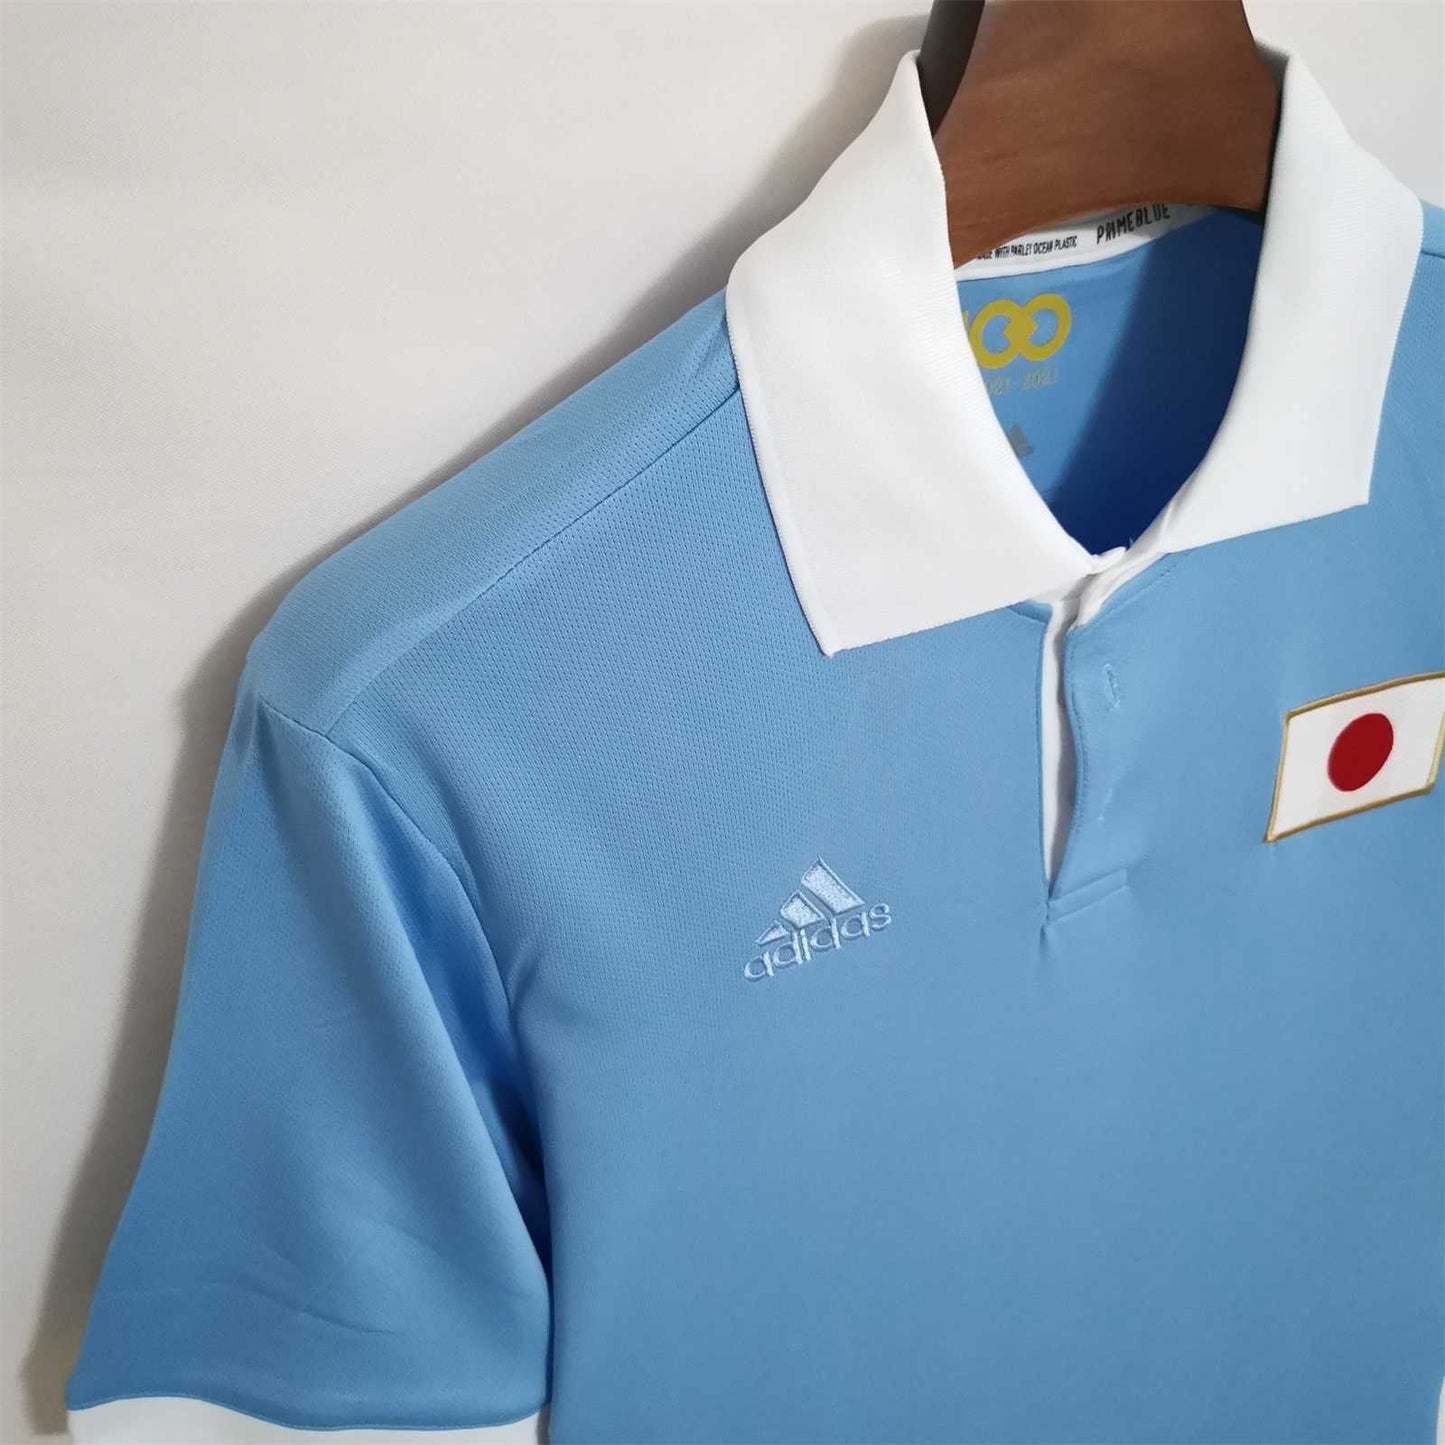 Giappone - Polo 100th - Limited Edition